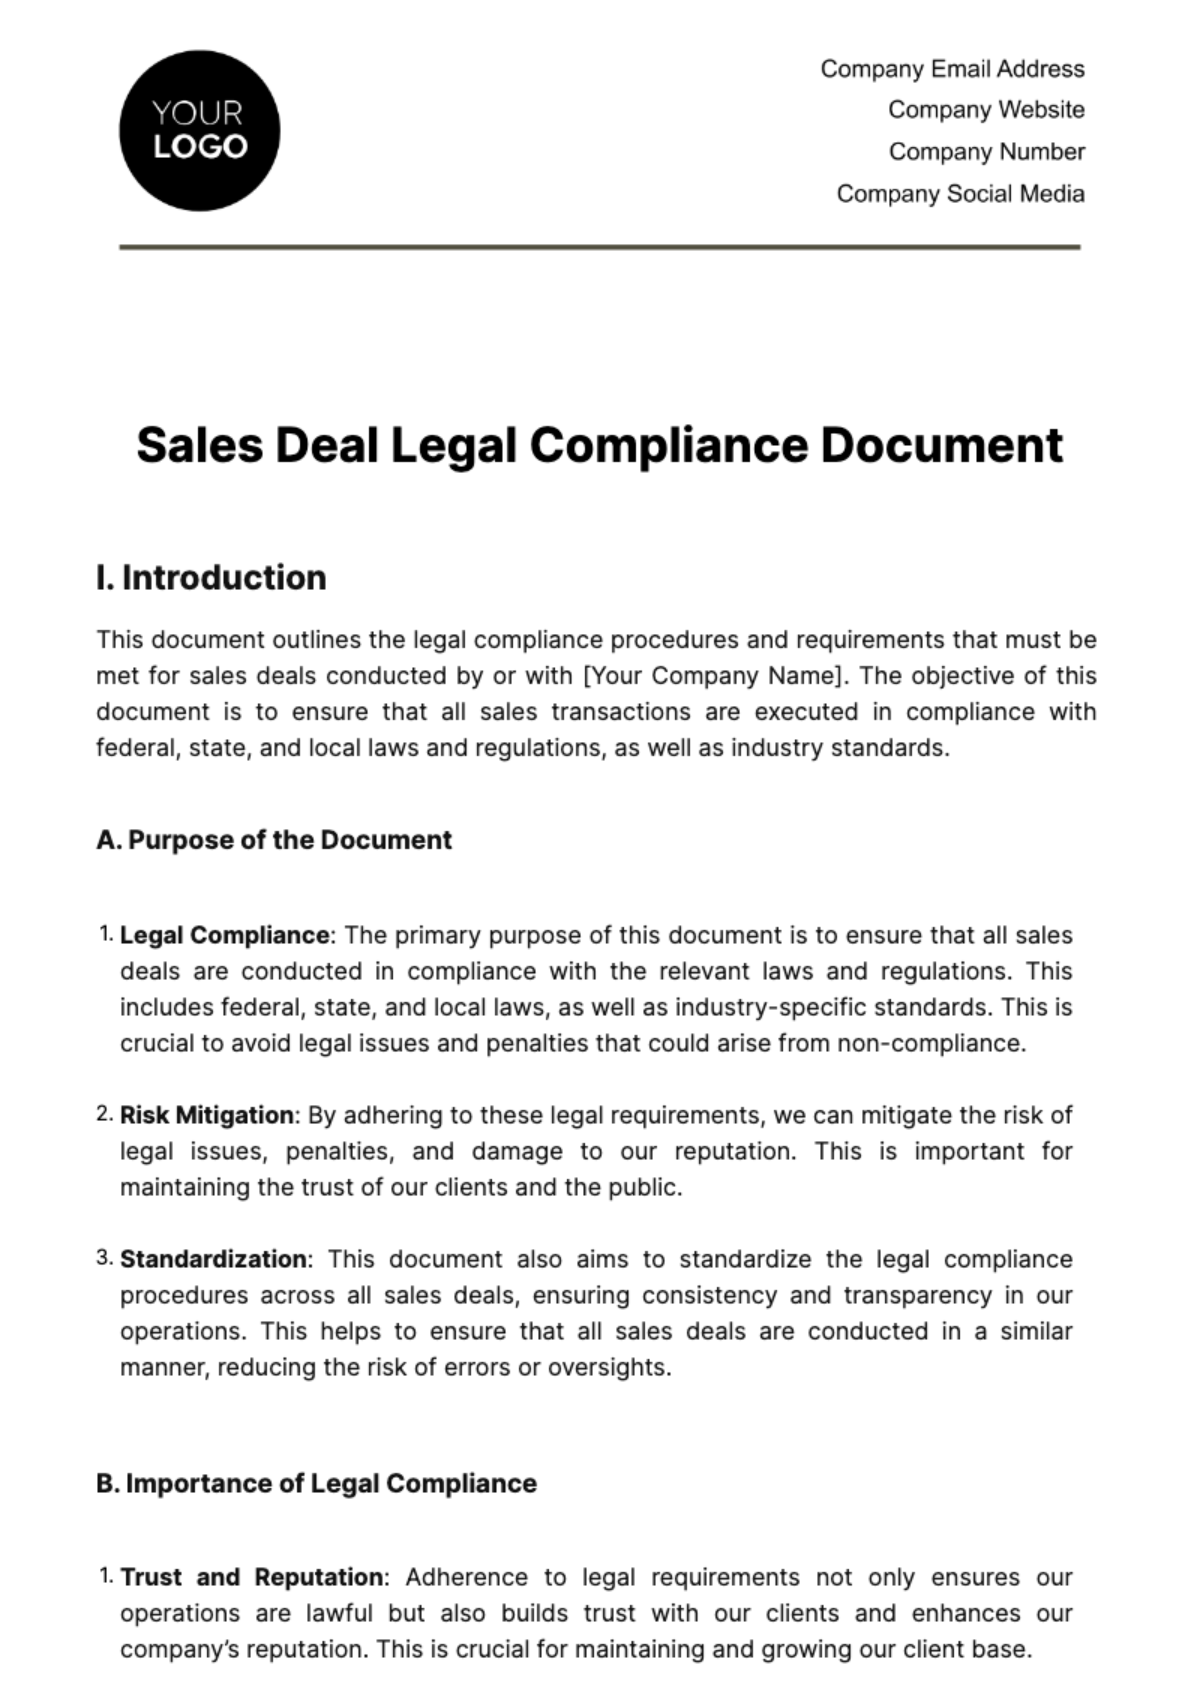 Free Sales Deal Legal Compliance Document Template